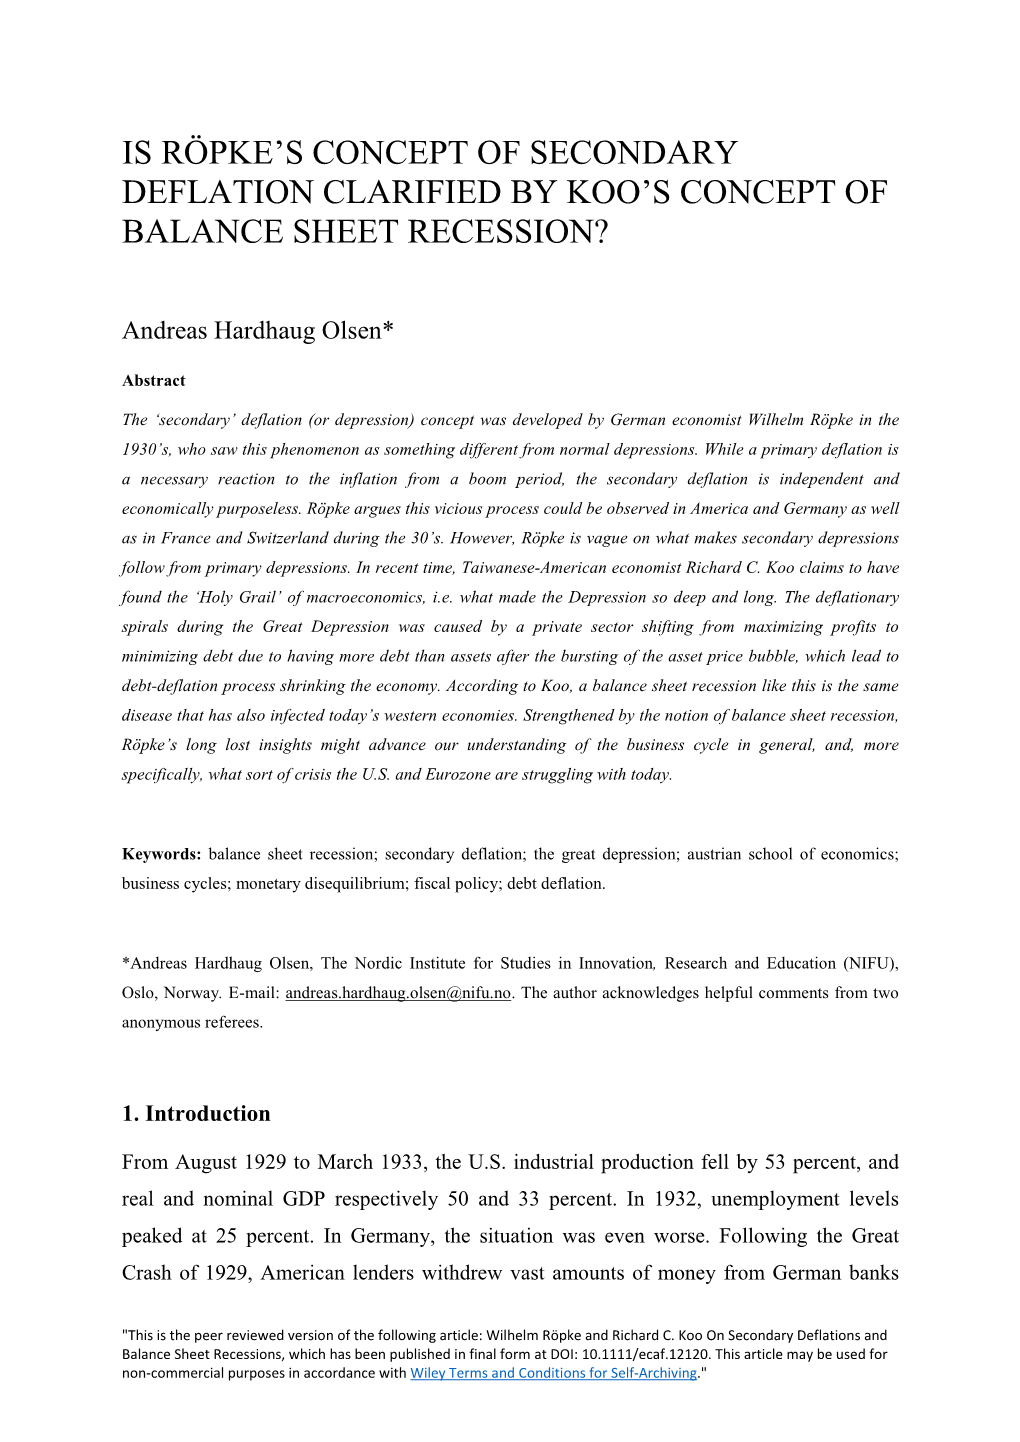 Is Röpke's Concept of Secondary Deflation